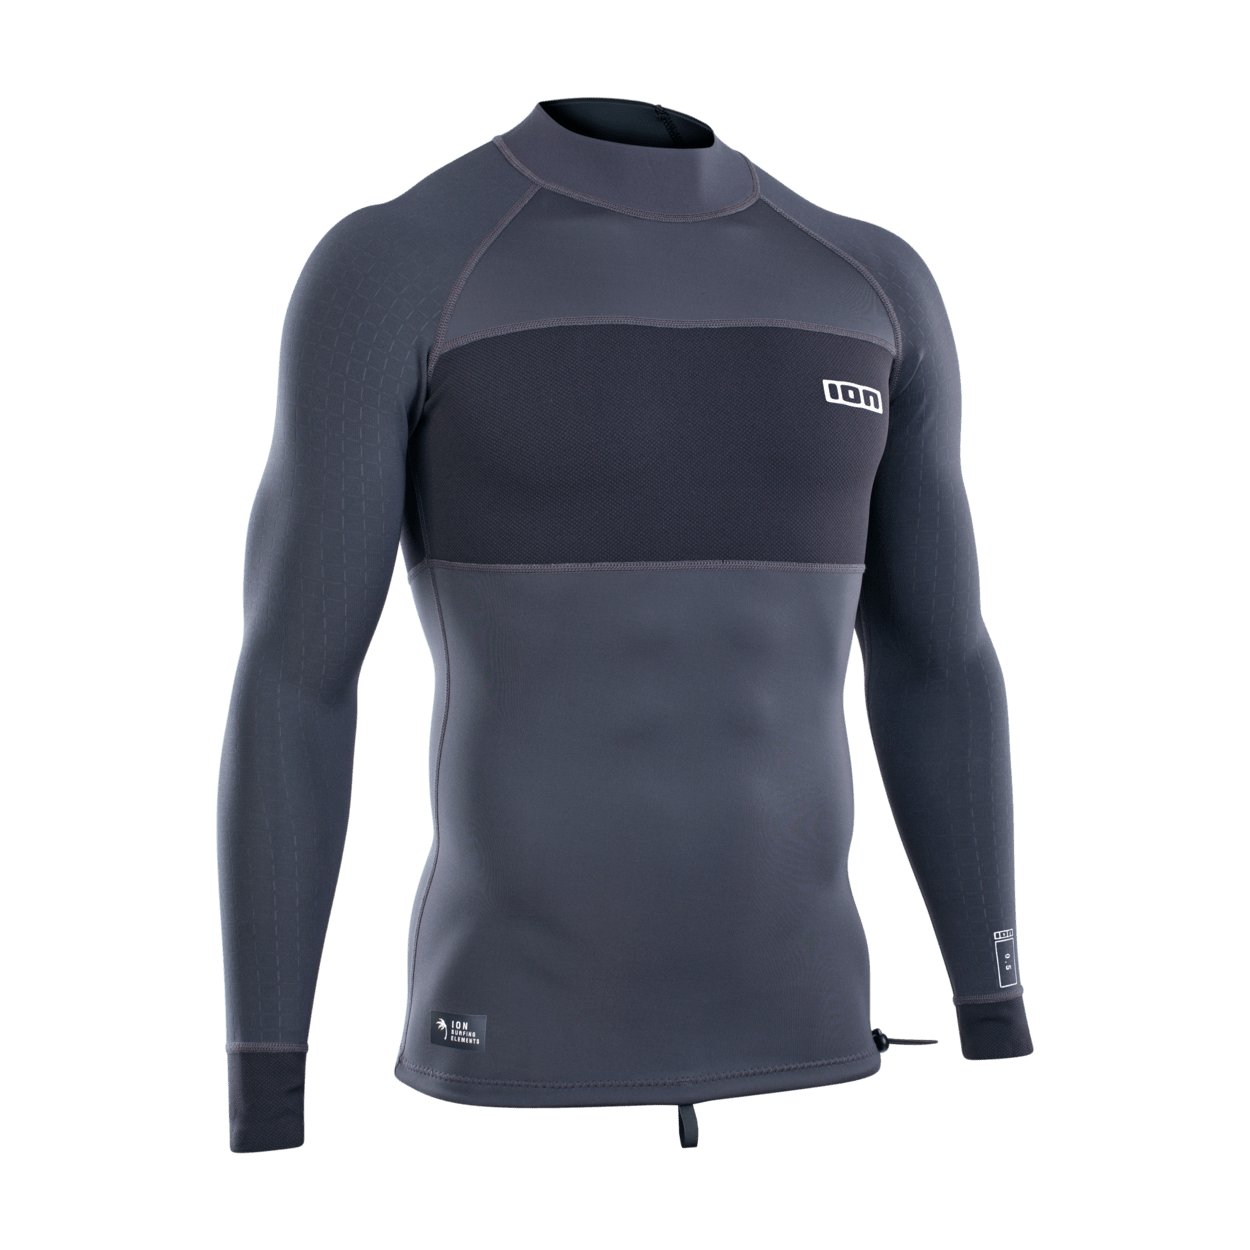 ION Neo Top 0.5 LS men 2022 - Worthing Watersports - 9010583058849 - Tops - ION Water